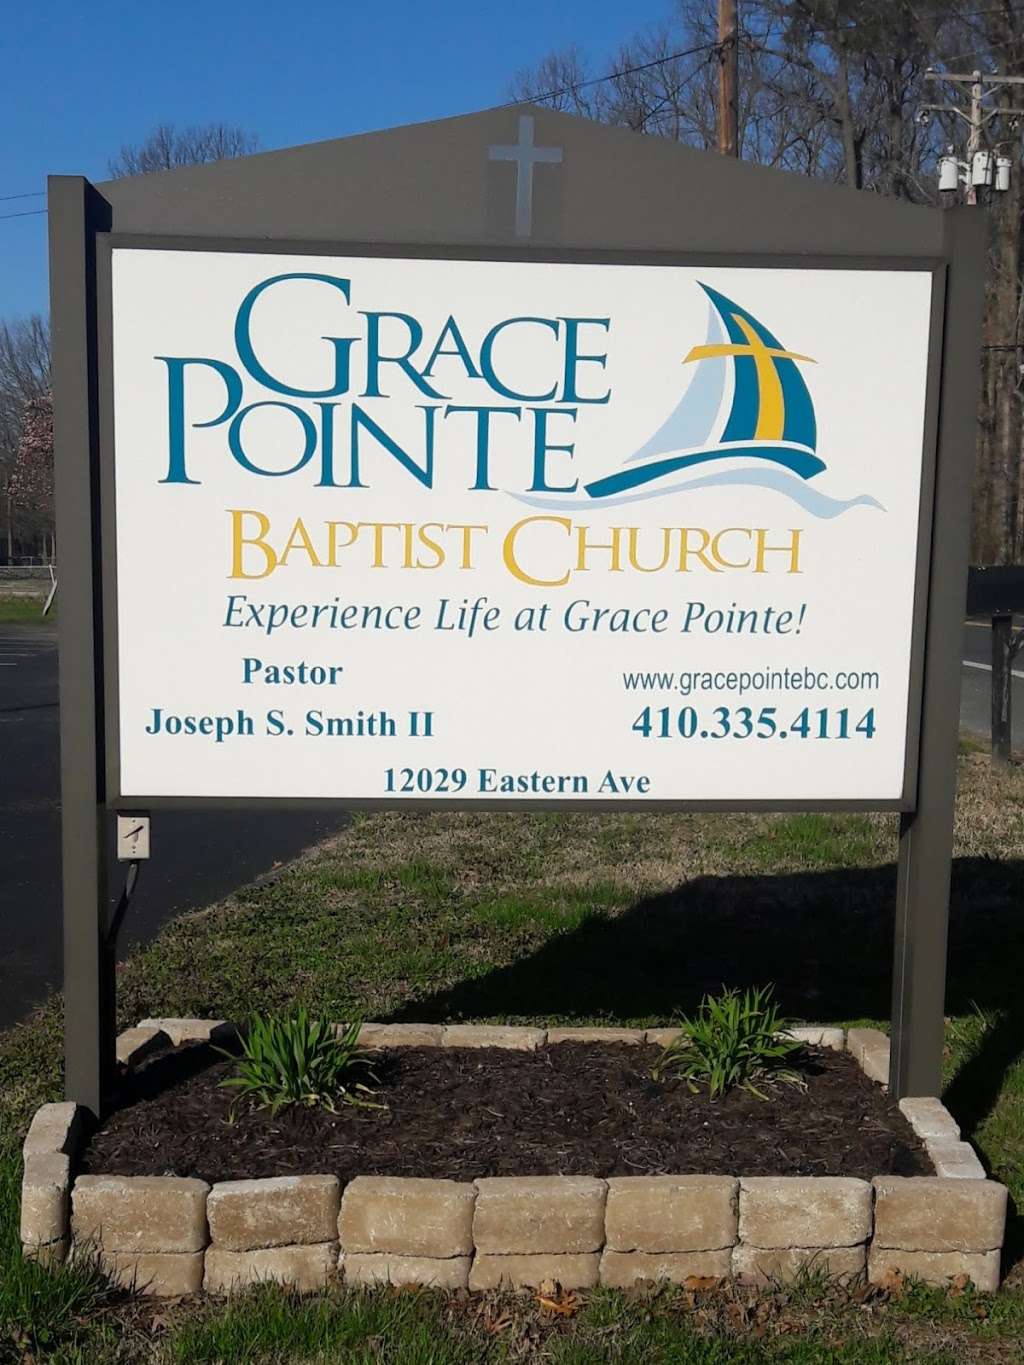 Grace Pointe Baptist Church | 12029 Eastern Ave, Baltimore, MD 21220 | Phone: (410) 335-4114